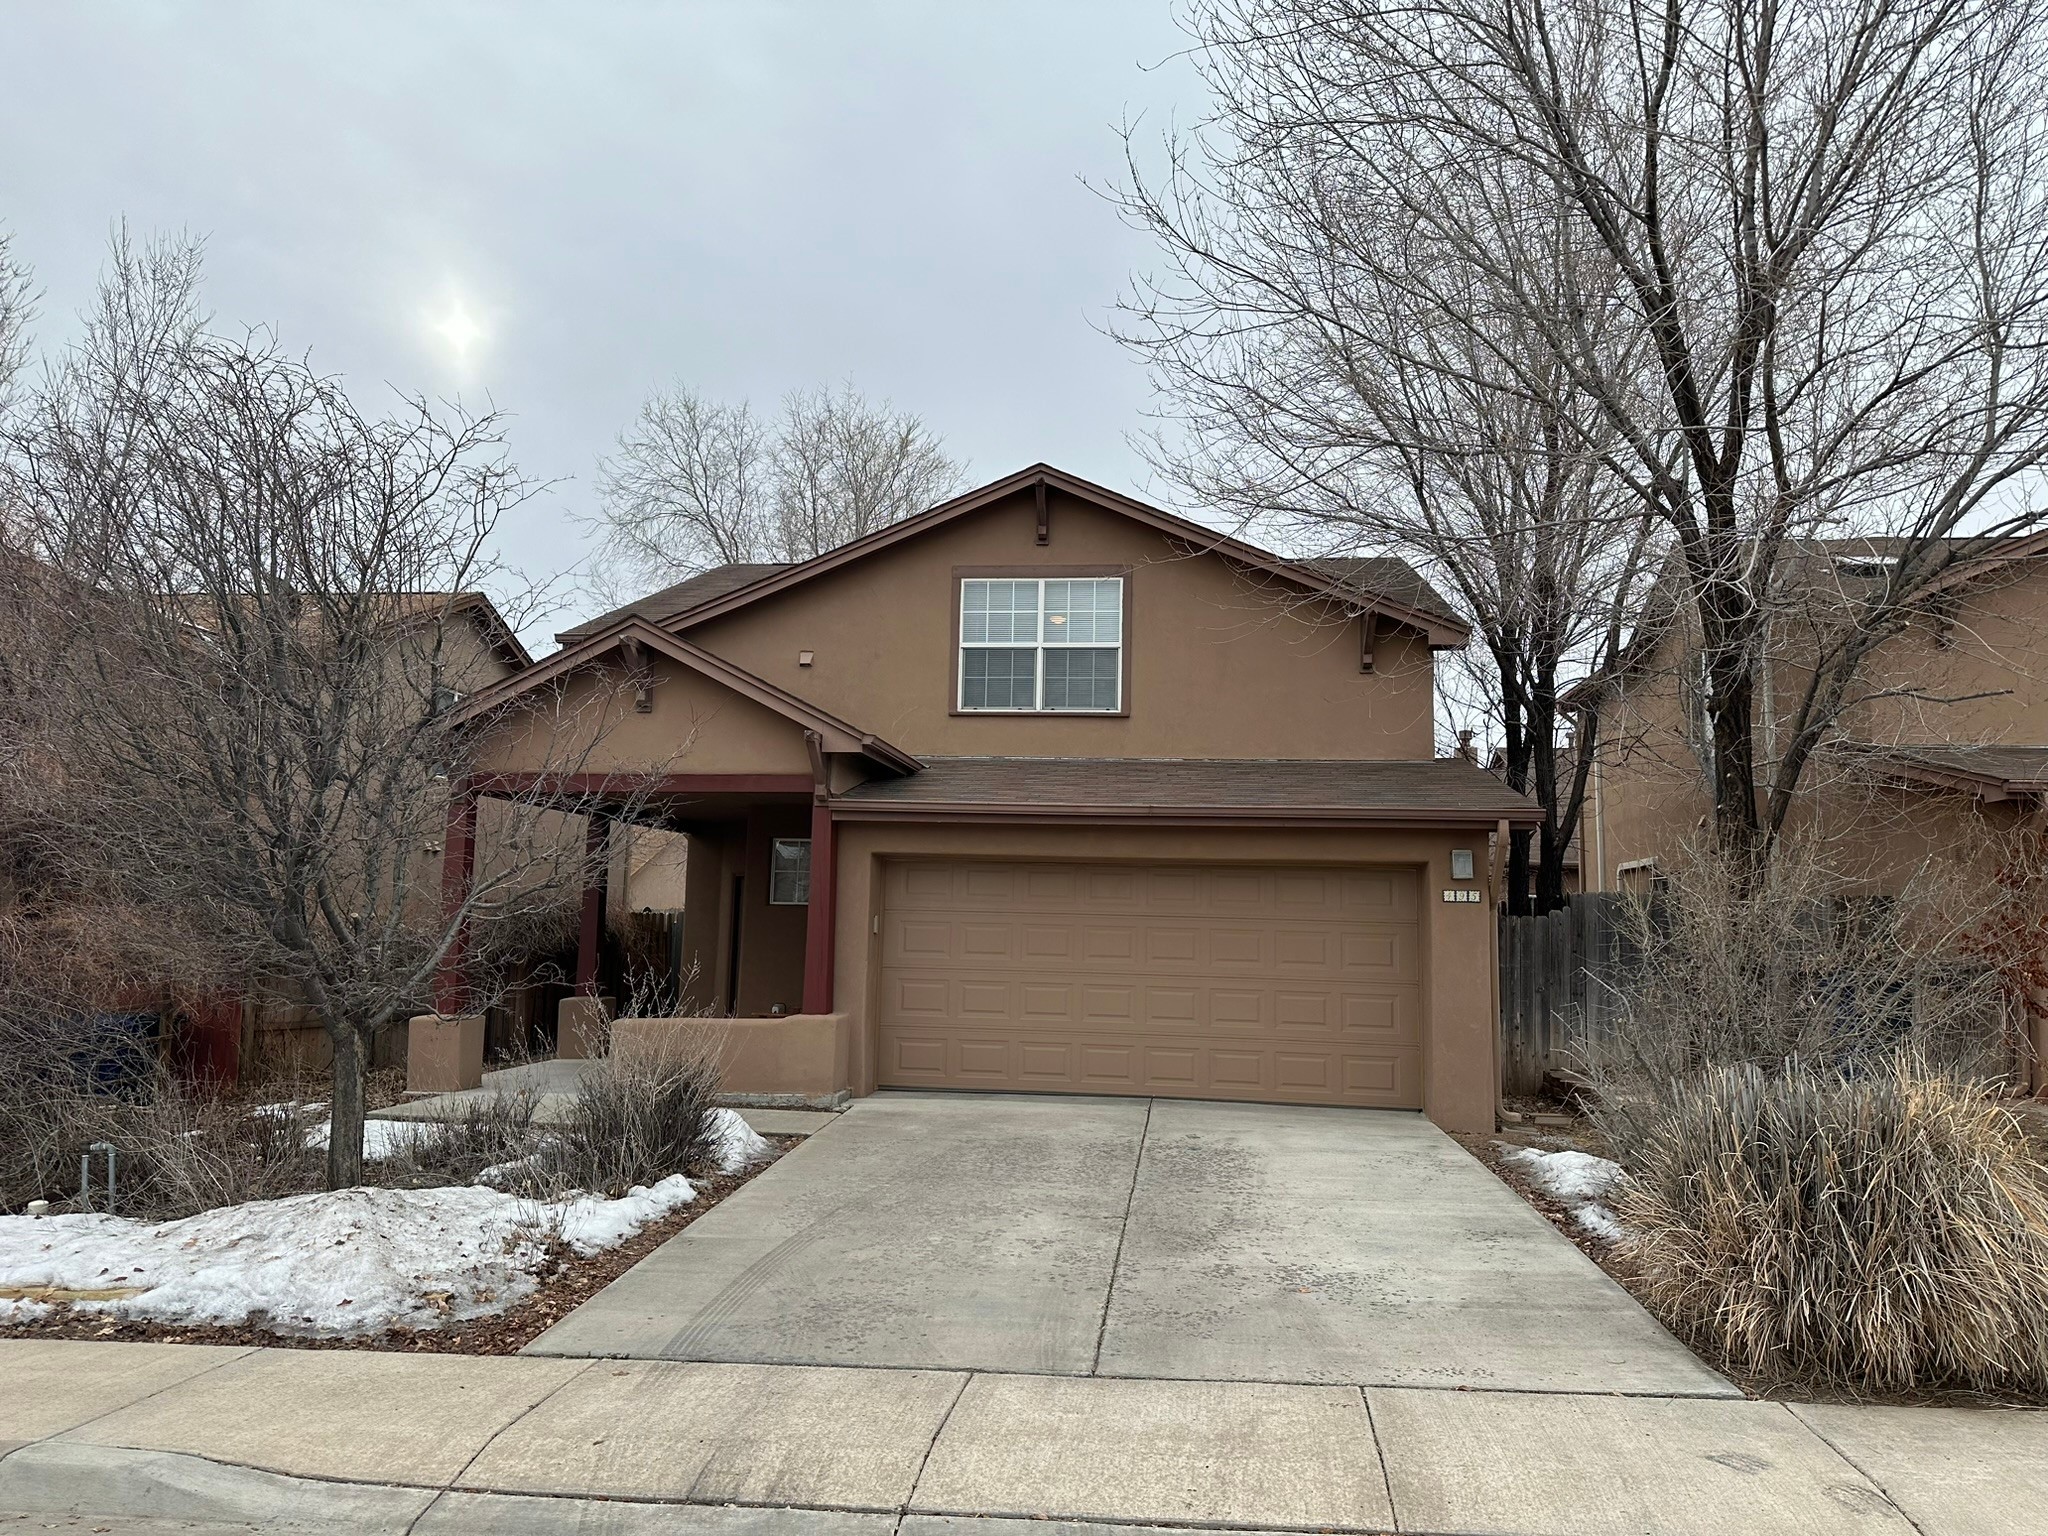 495 Aster Street, Los Alamos, New Mexico 87547, 3 Bedrooms Bedrooms, ,3 BathroomsBathrooms,Residential,For Sale,495 Aster Street,202342072